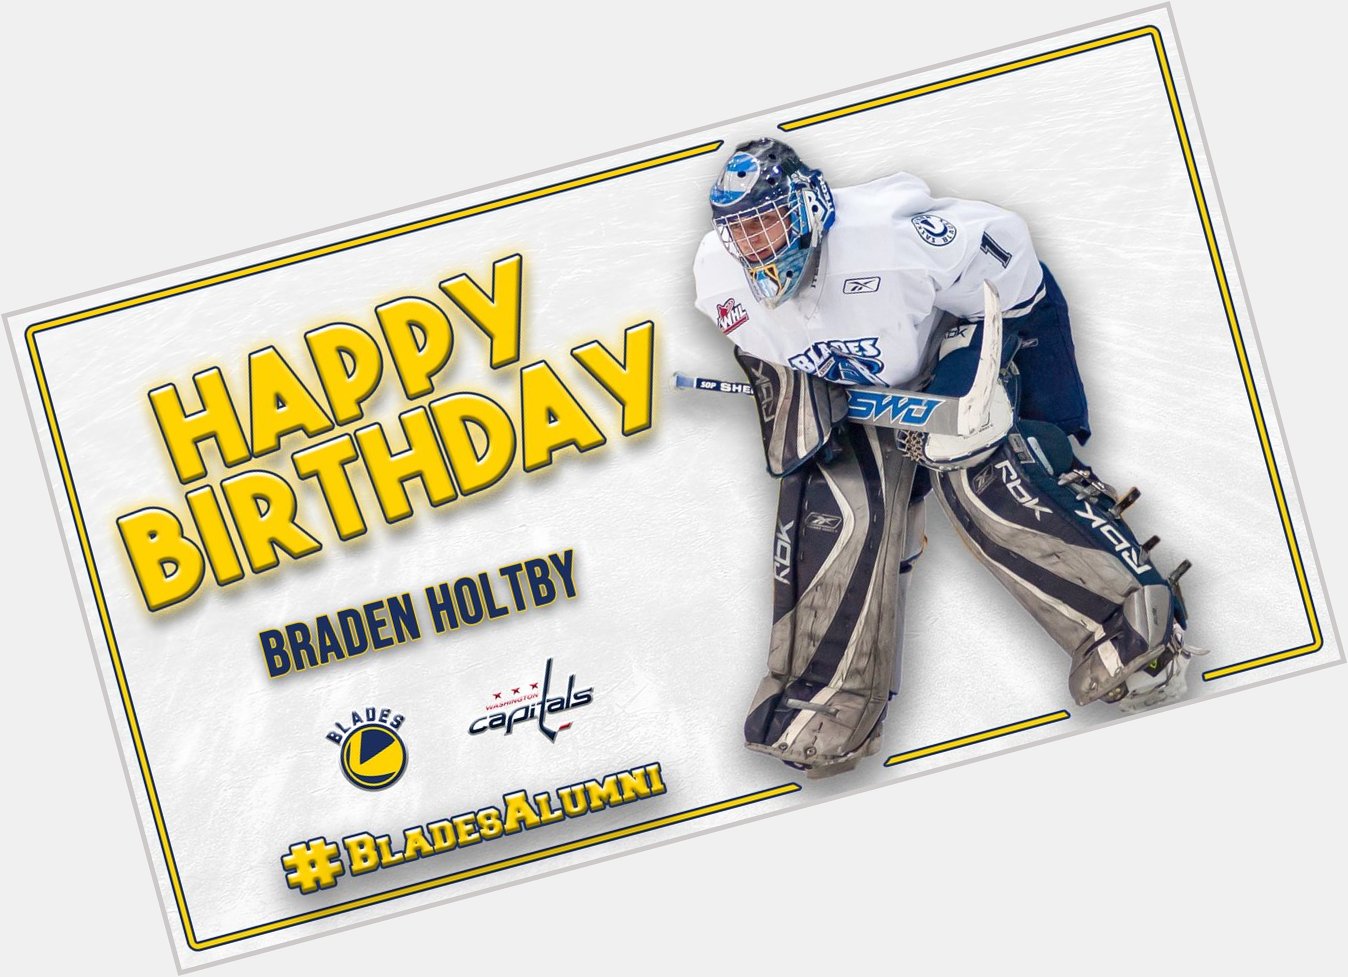 Did you know Braden Holtby used to play for us? Like this post to wish Holts a Happy Birthday 